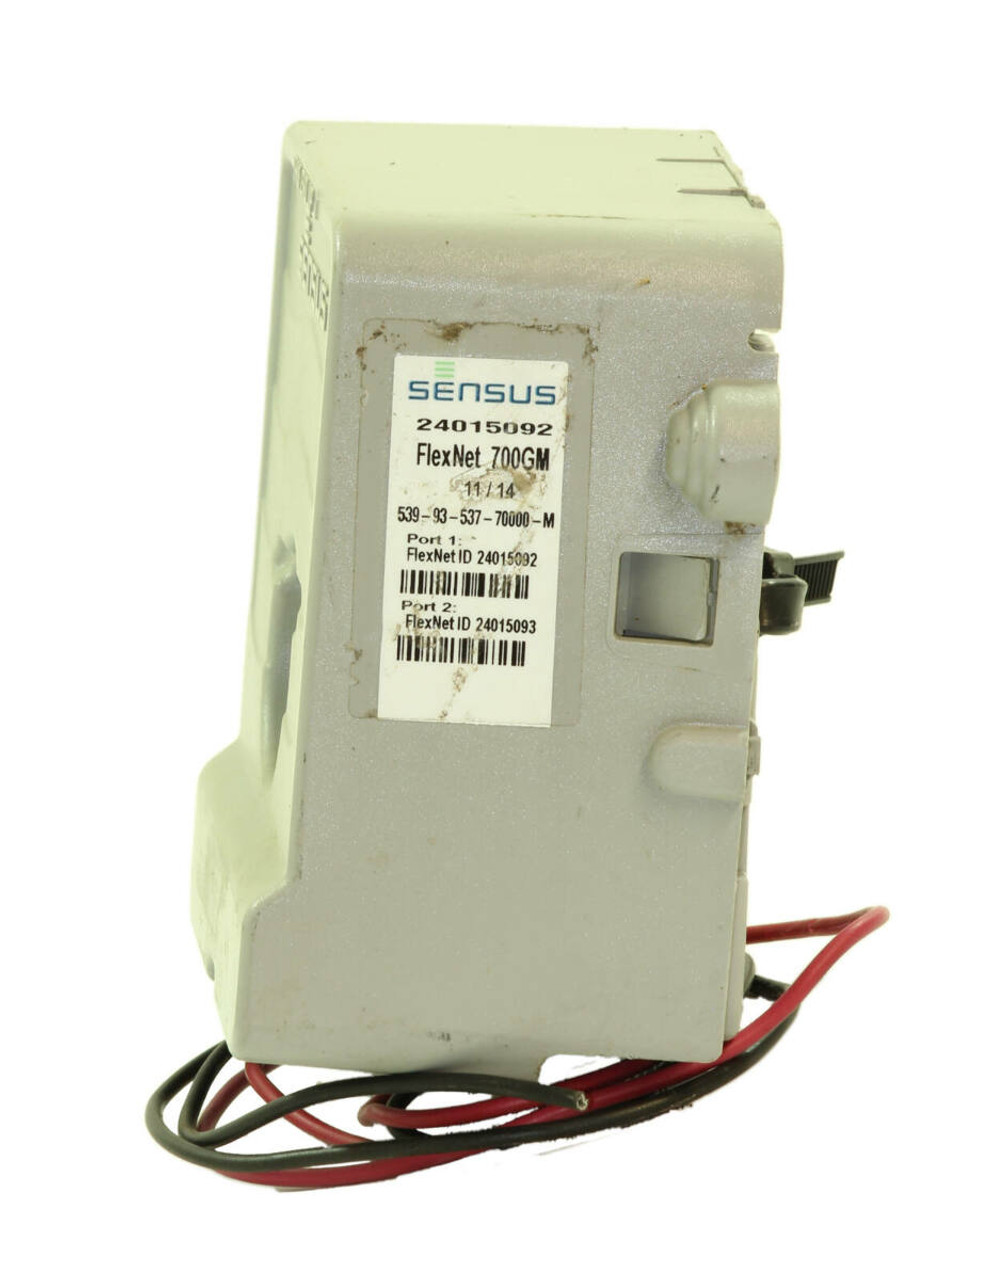 Sensus FlexNet 700 GM SmartPoint GM Industrial Transceiver Walk-by, drive-by or fixed-base deployment